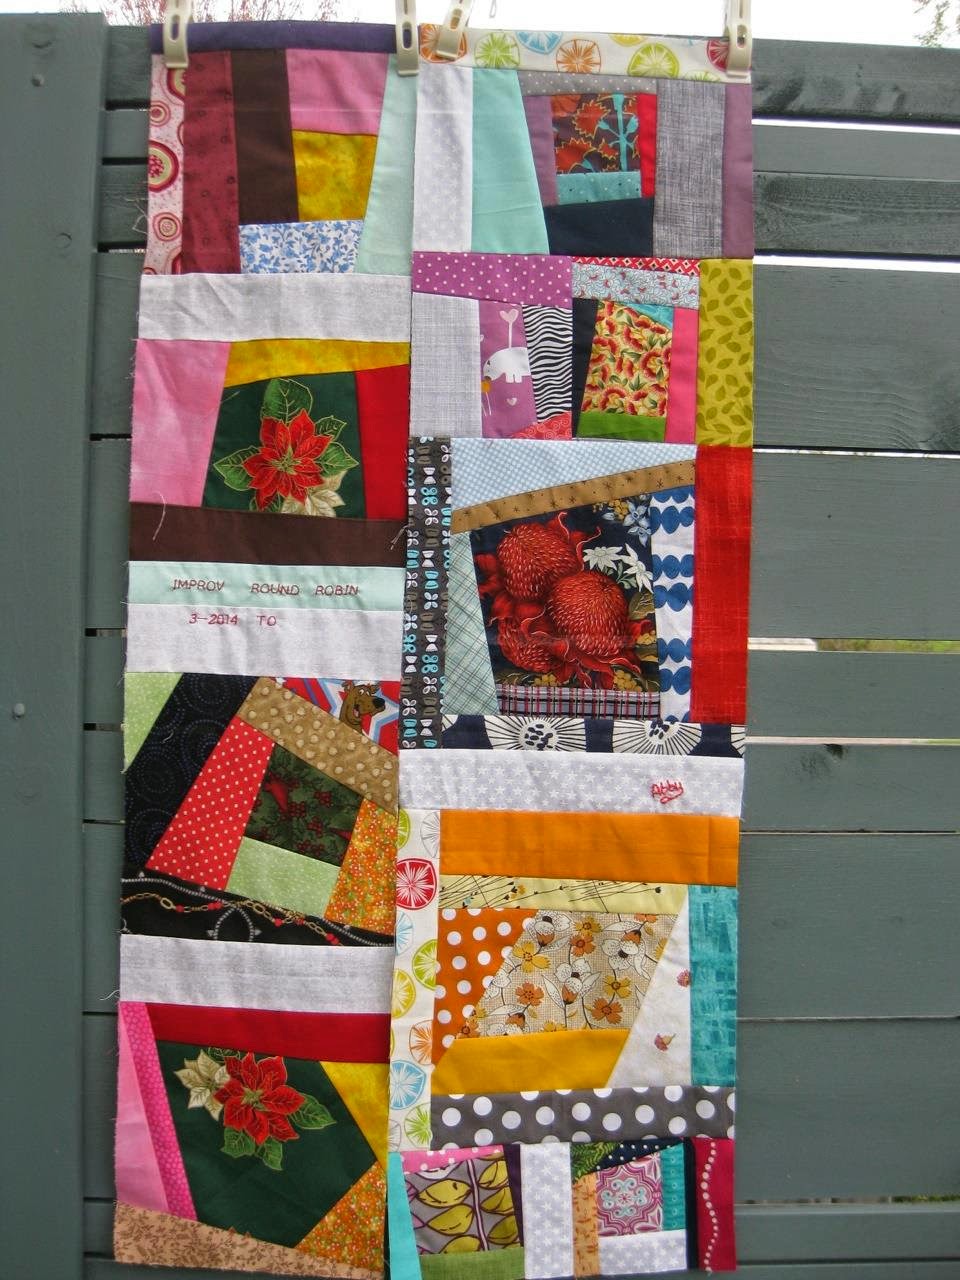 Round Robin-Royalee's Quilt by Afton Warrick @ Quilting Mod